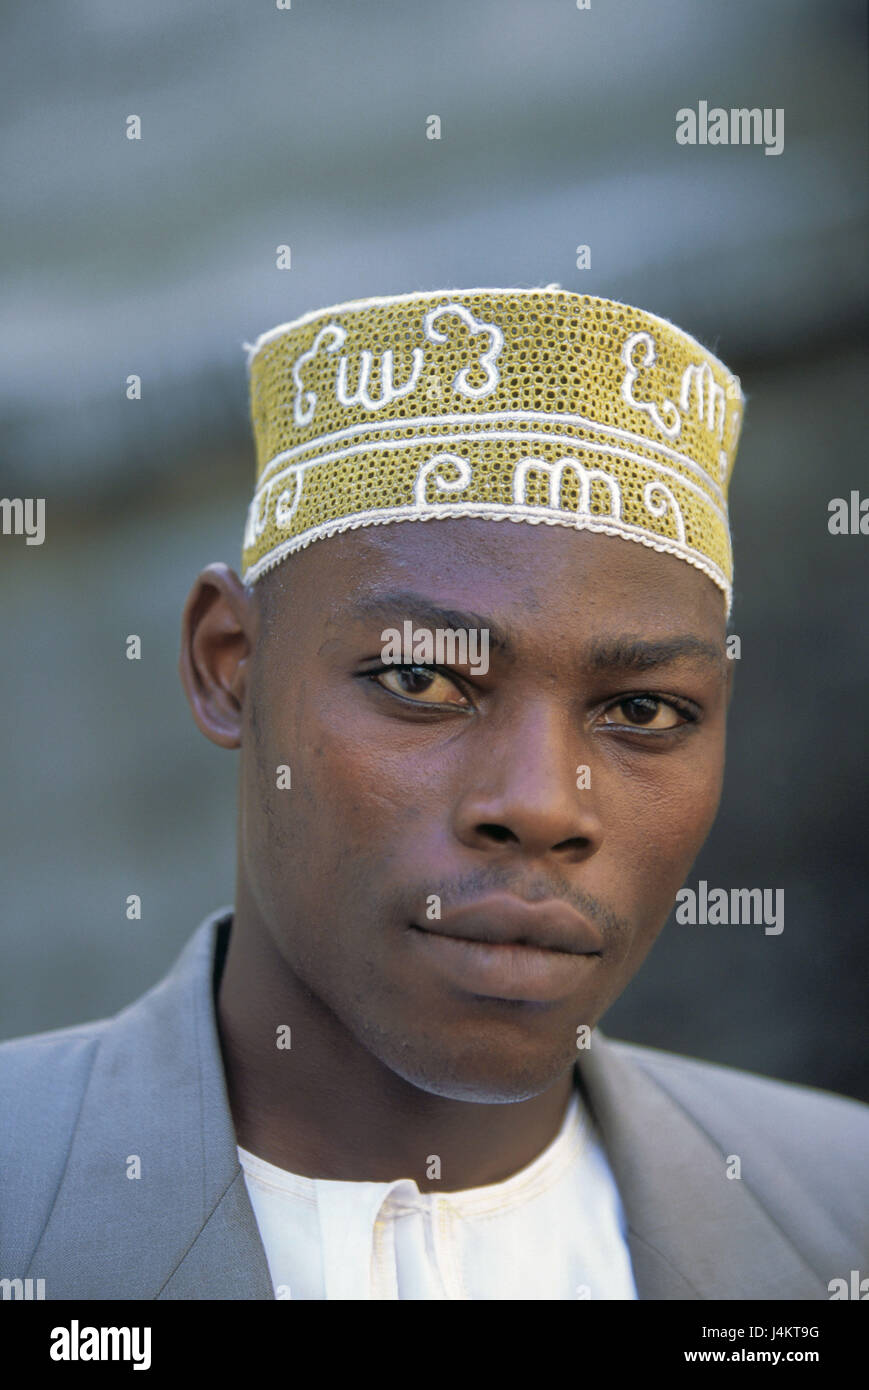 The Comoro Archipelago, island Anjouan, Mutsamudu, man, young, cap, portrait no model release! Africa, Indian ocean, island state, Nzwani, man's portrait, young, non-white, swarthy, swarthy, local, headgear, traditionally, tradition, faith, religion, religiously, Moslem, Islamic, Islam, view camera Stock Photo